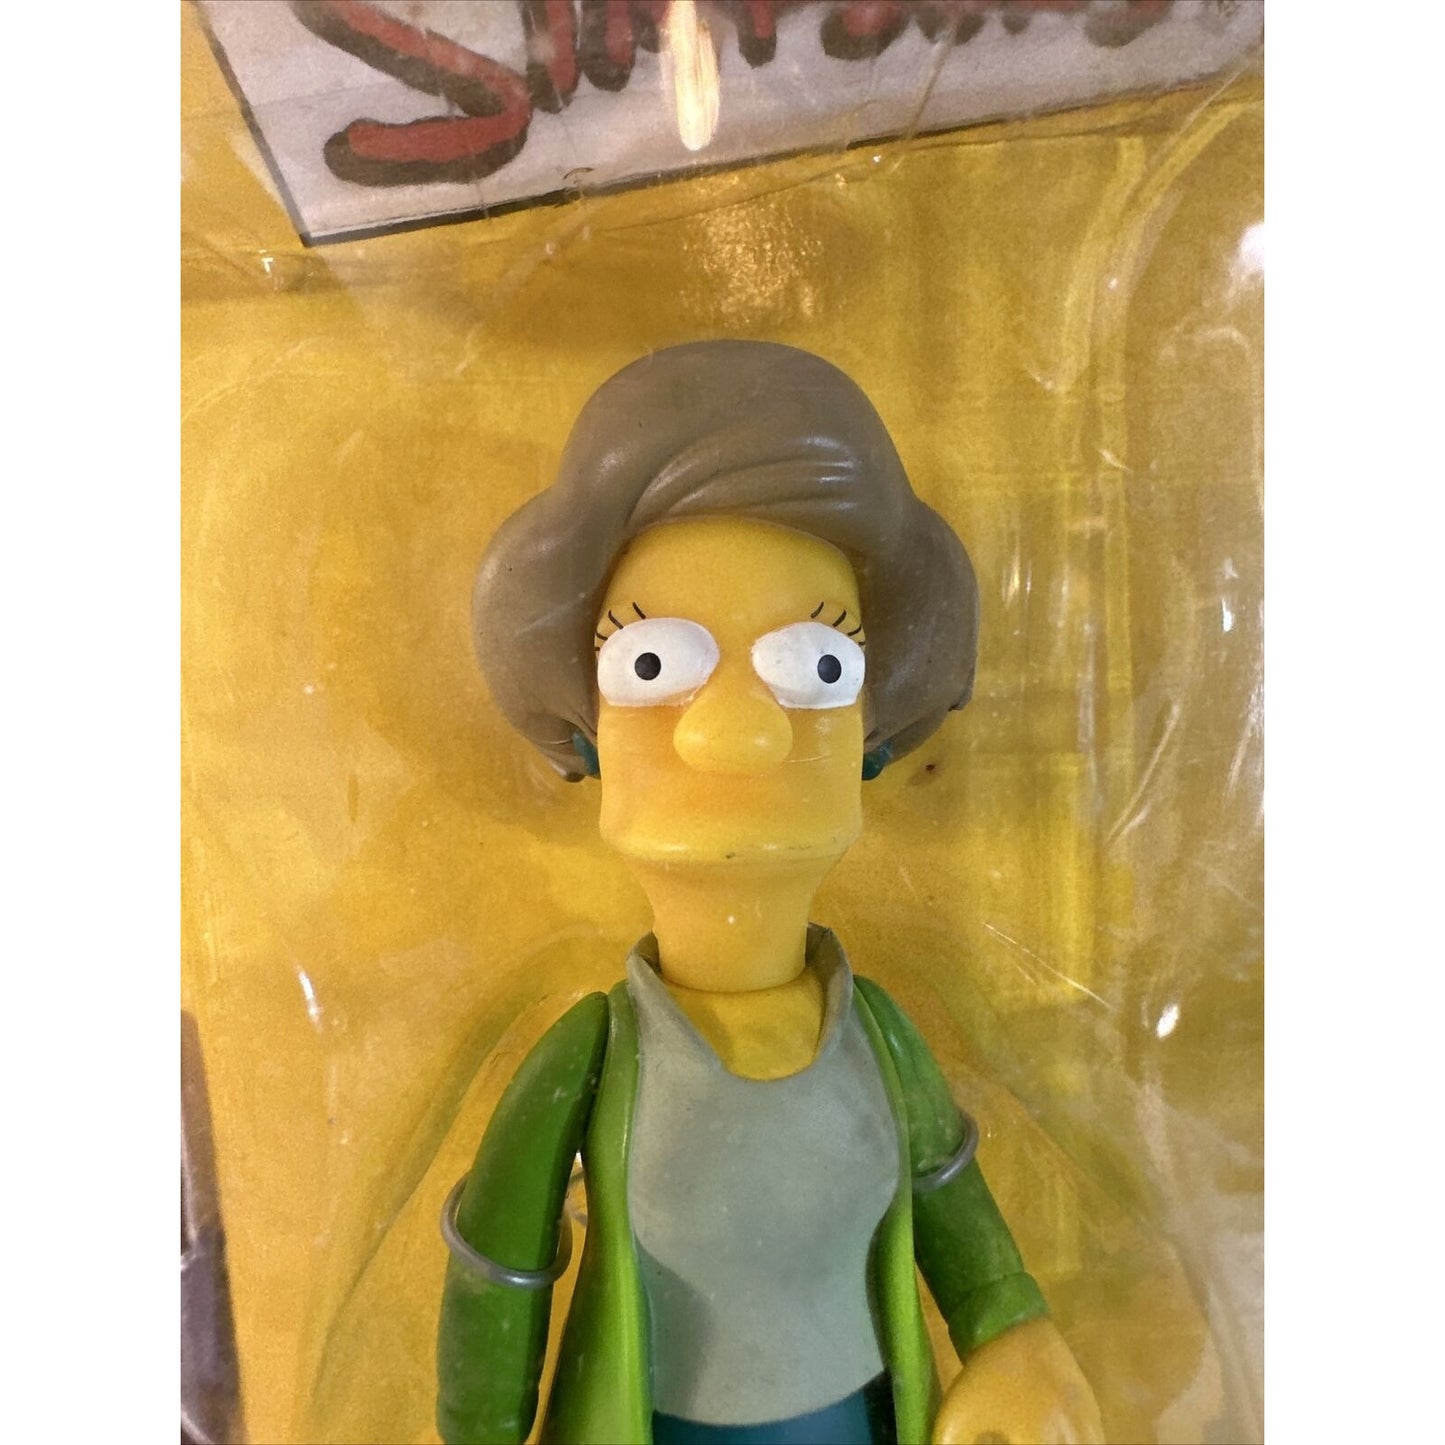 The Simpsons Edna Krabappel Series 7 World of Springfield Action Figure Playmate